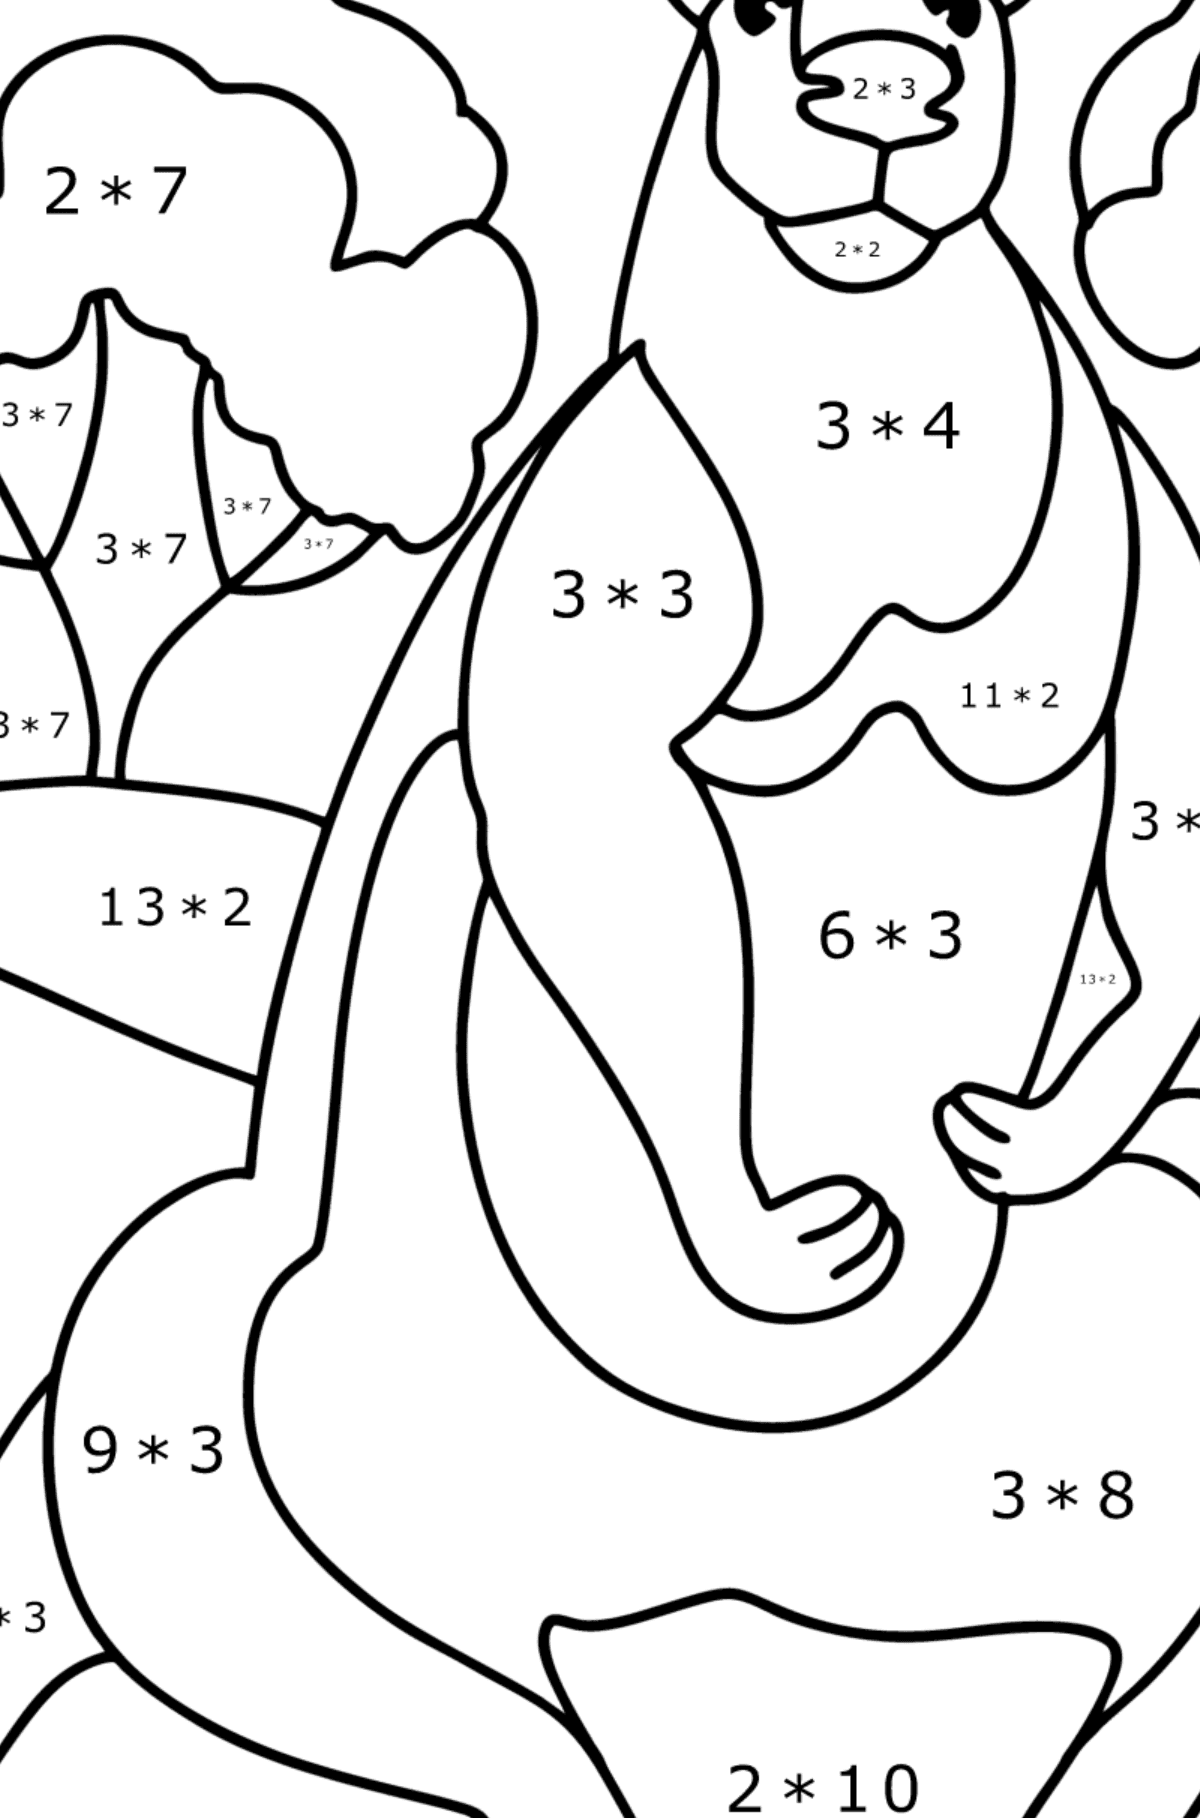 Giant Kangaroo coloring page - Math Coloring - Multiplication for Kids